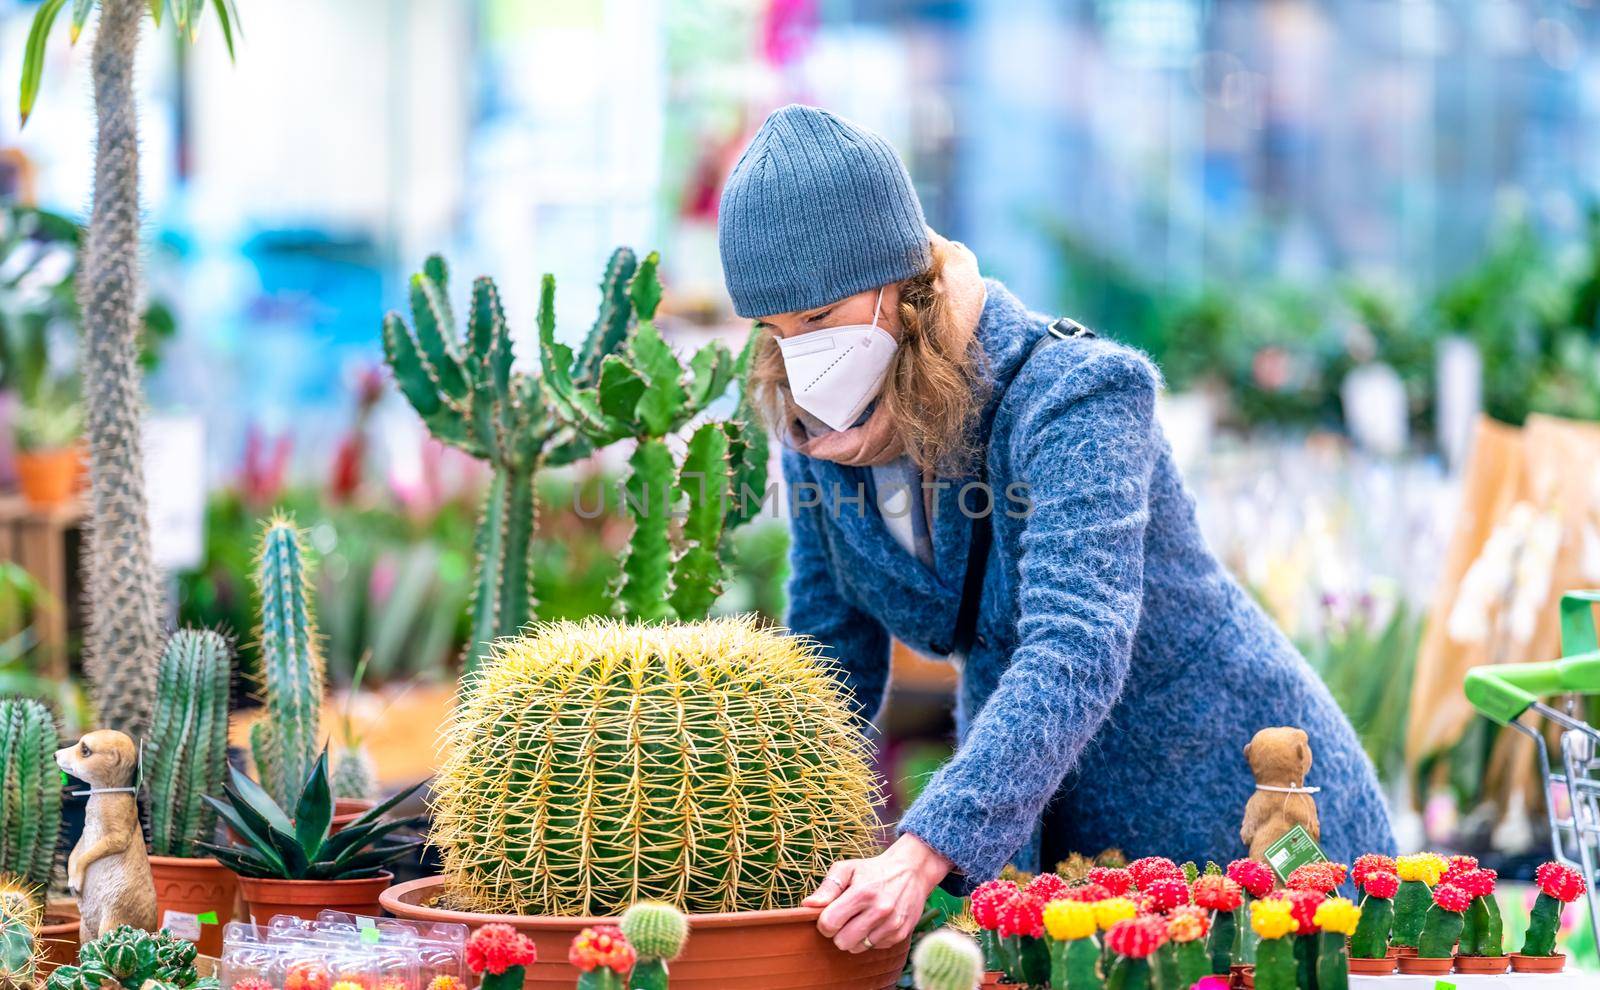 buying a cactus in a flowerpot at the store by Edophoto